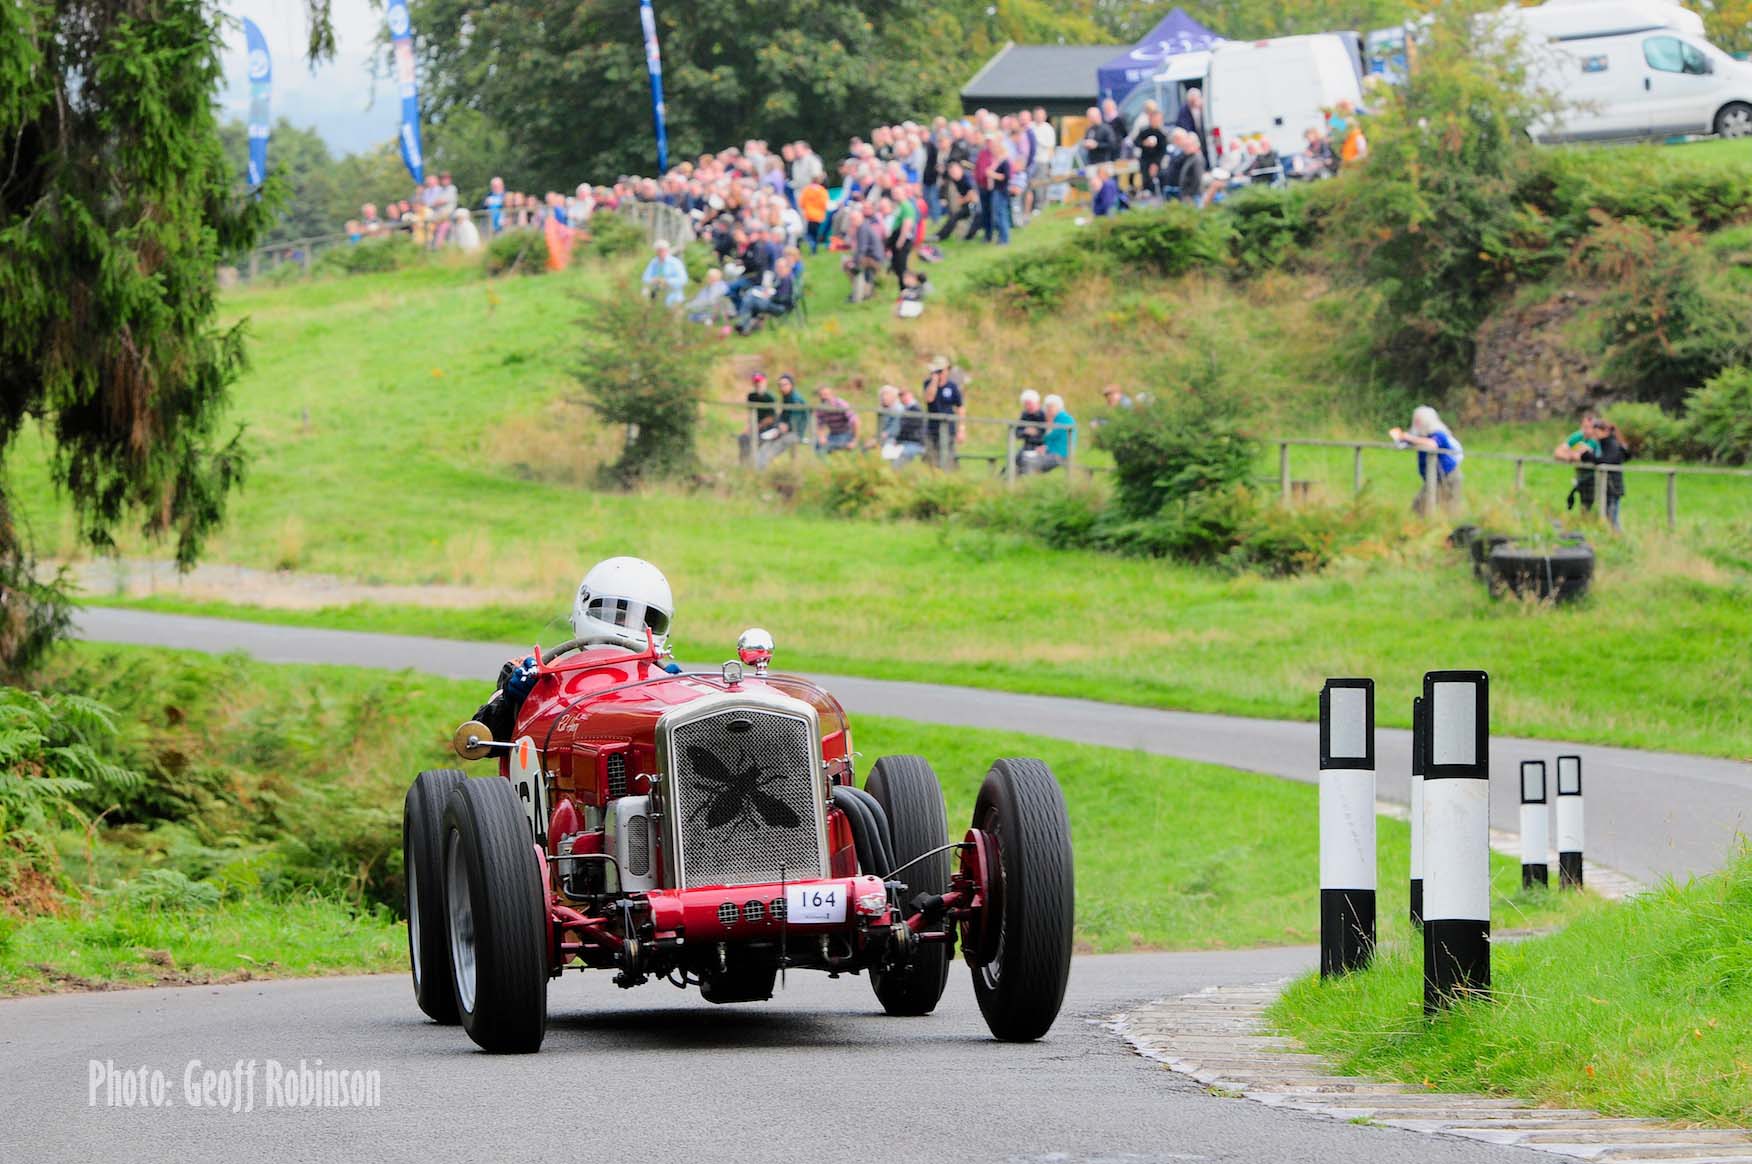 Will you be joining us for the VSCC Loton Park Hill Climb? cover